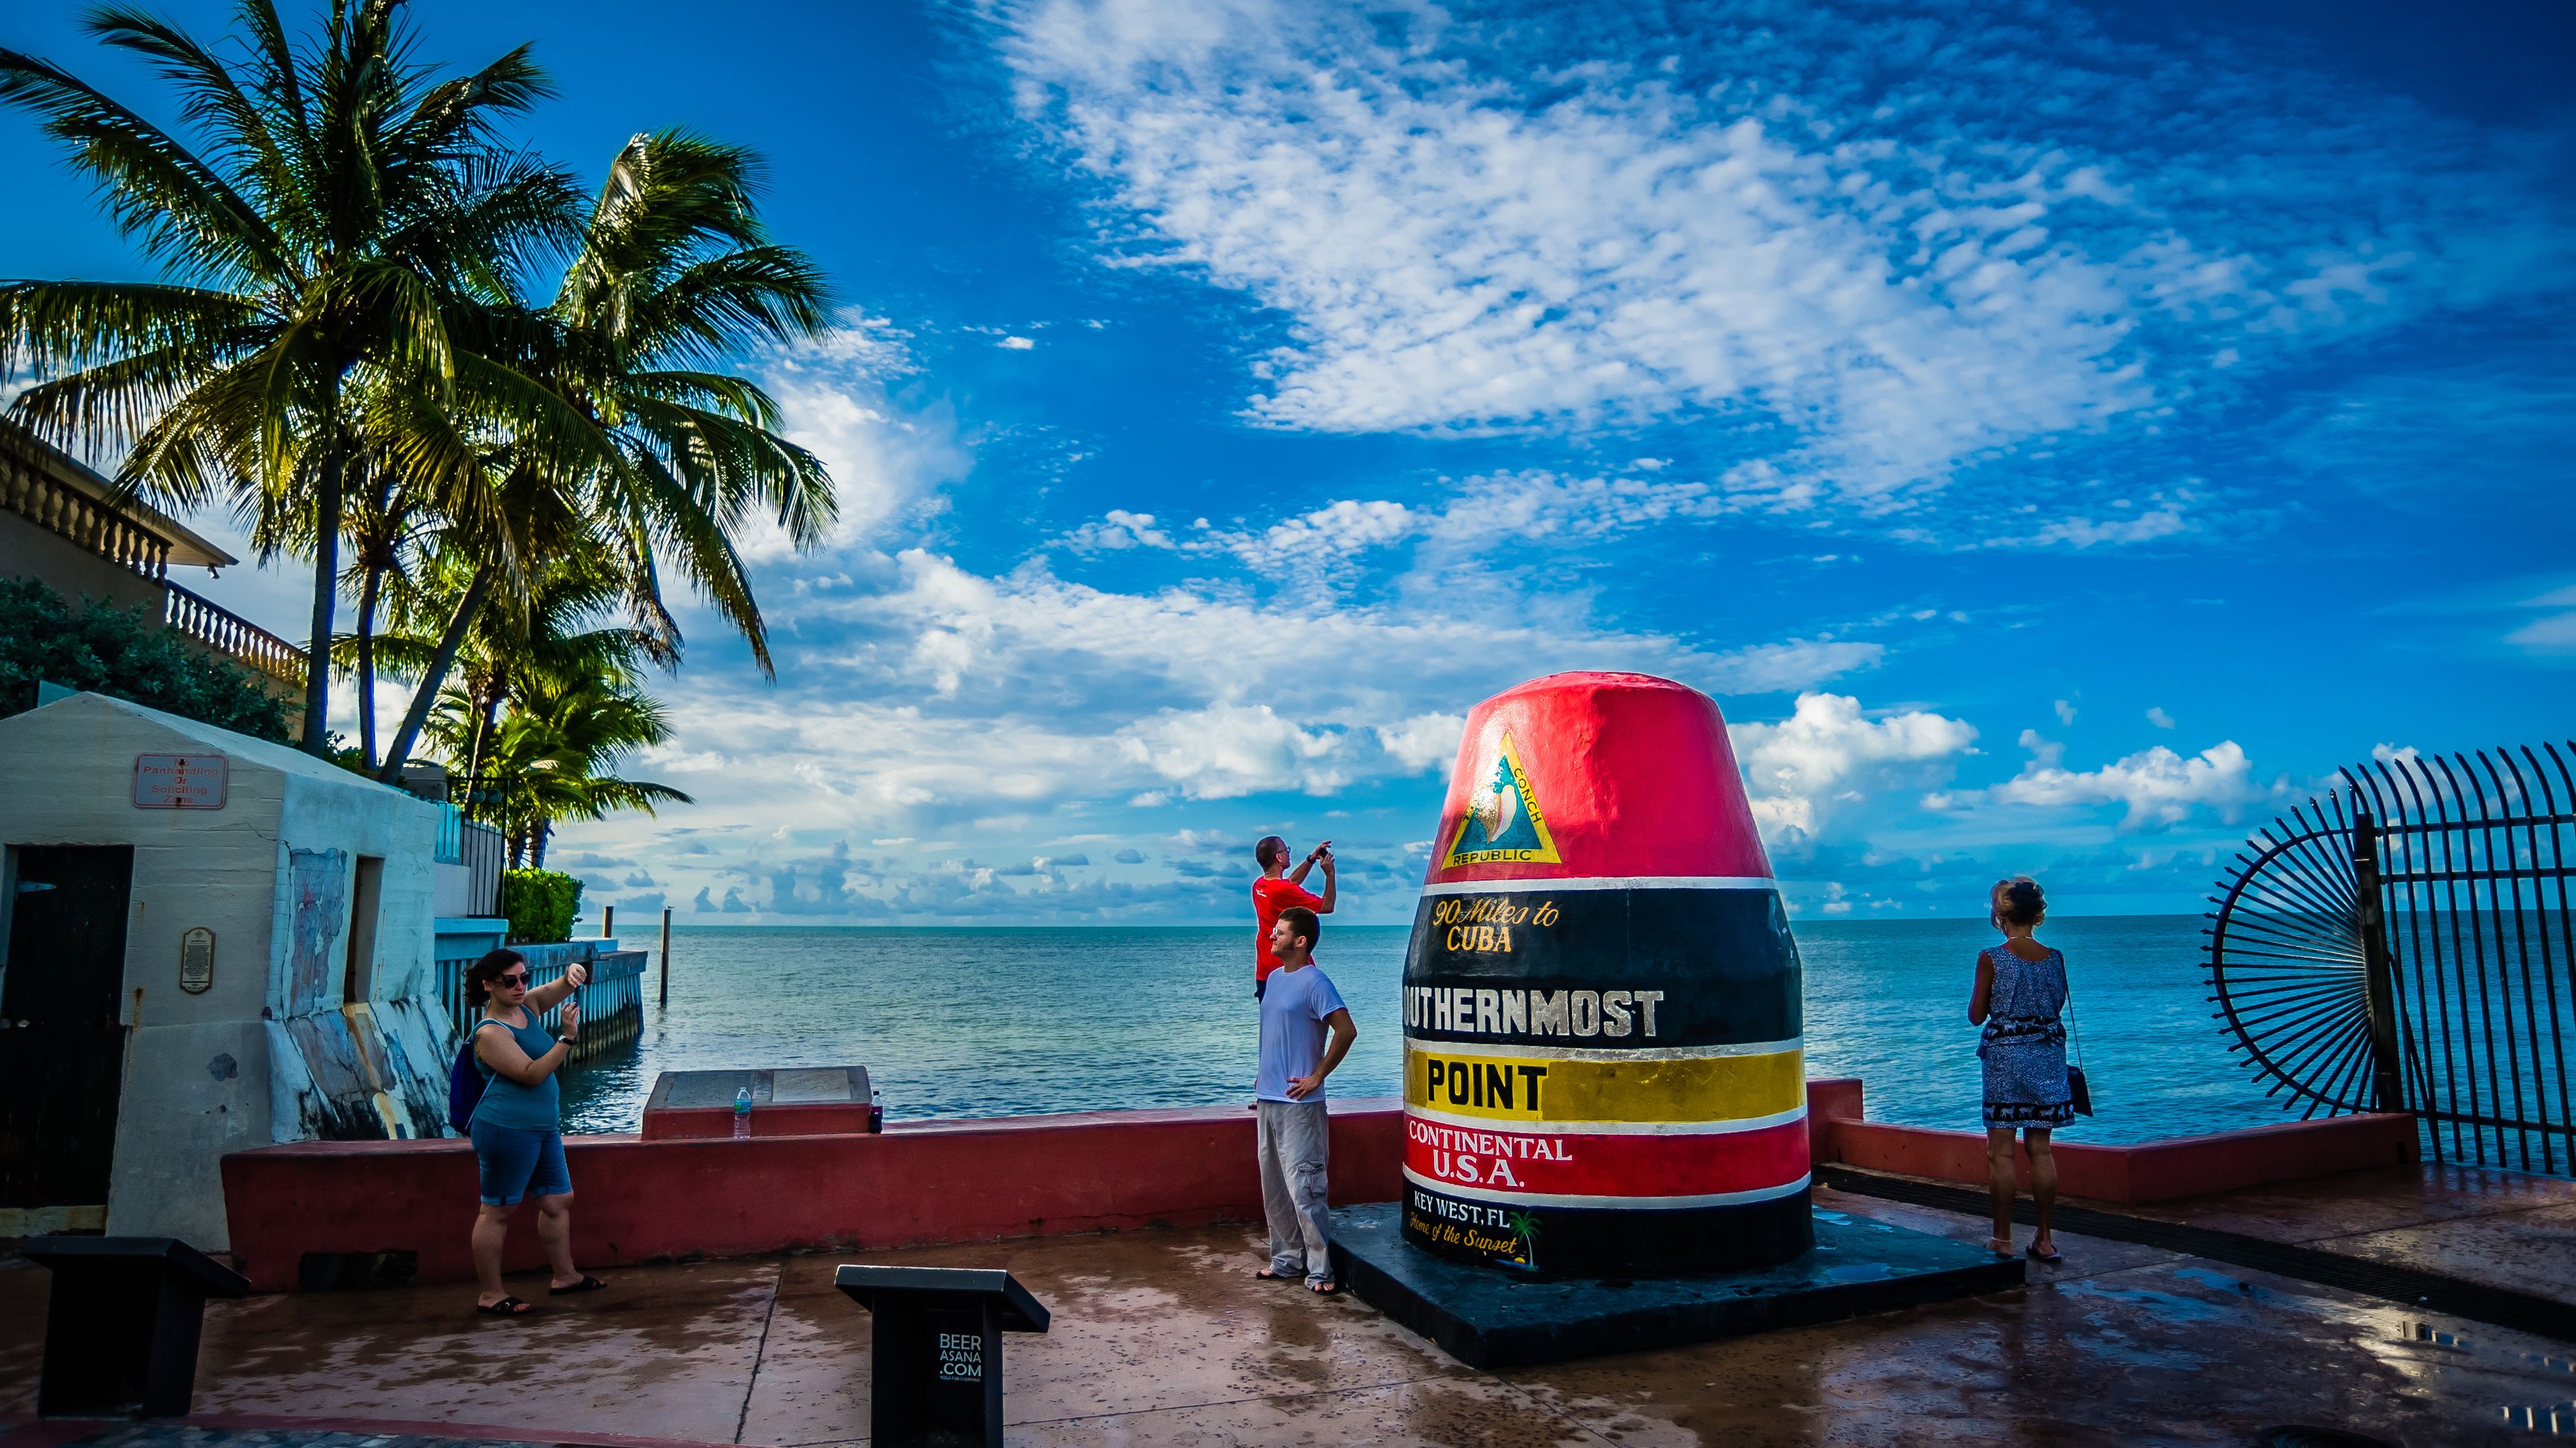 Key West - What to see in Key West and how to get there from Miami